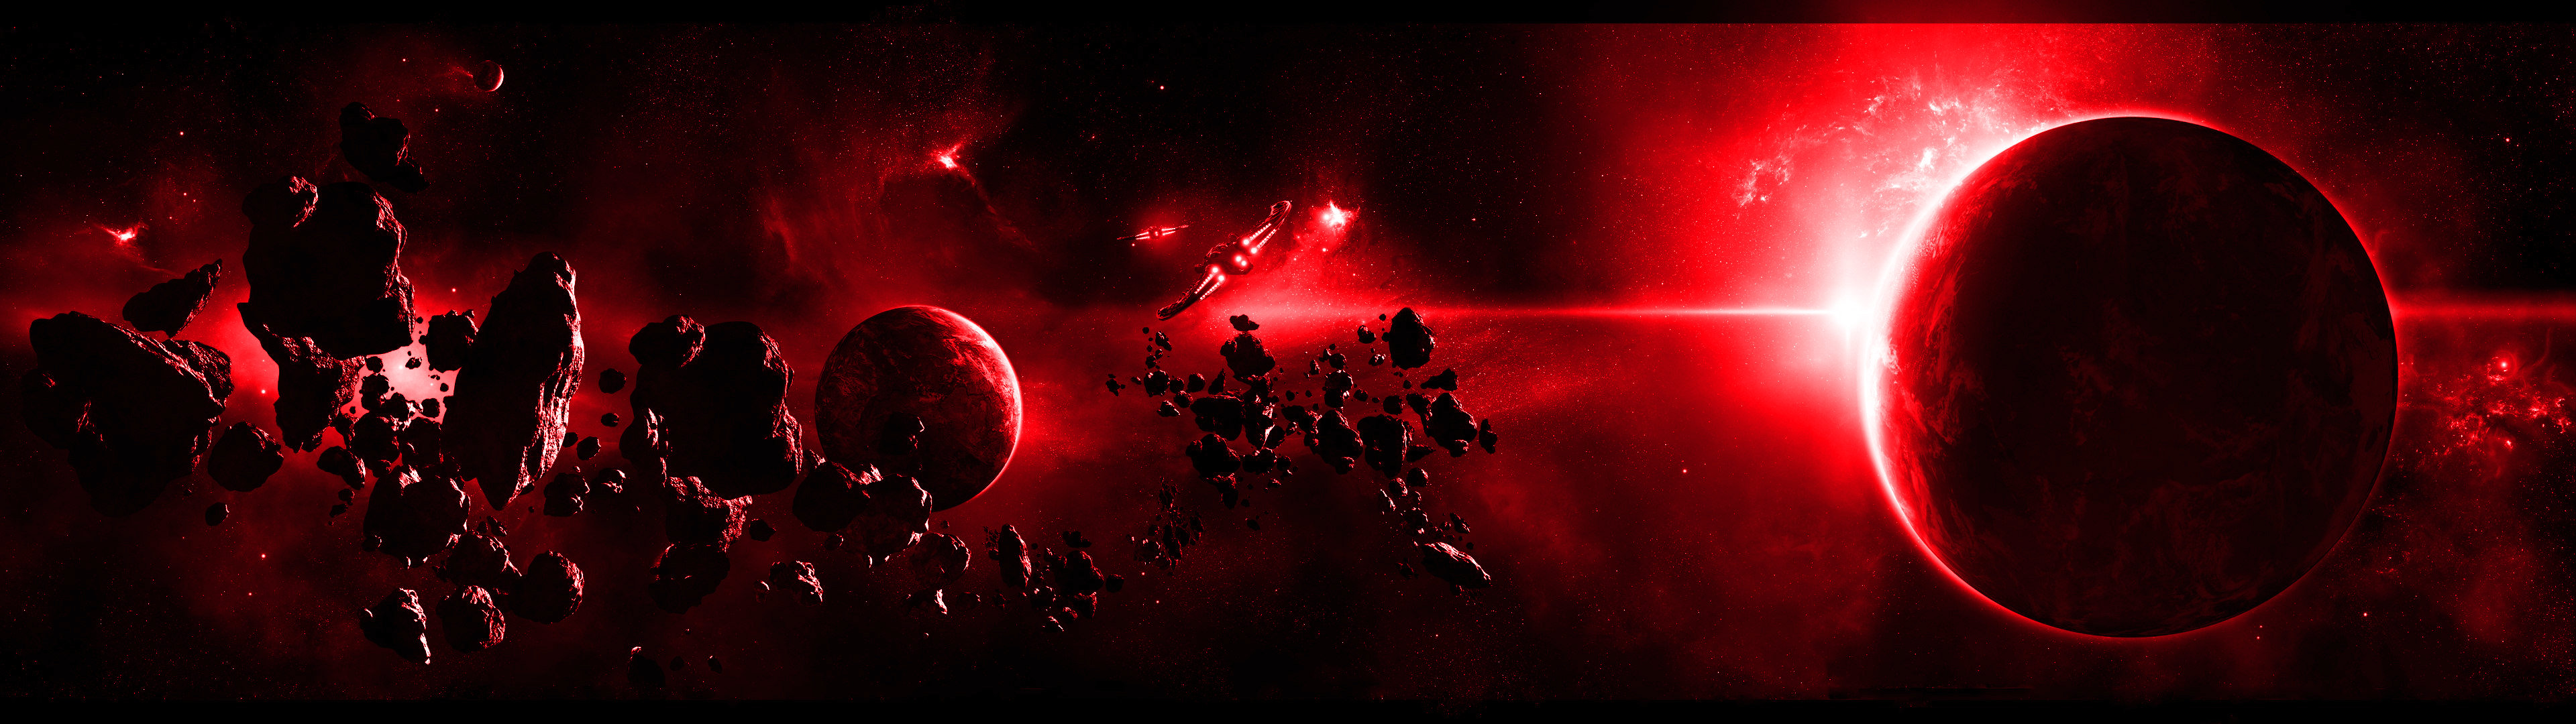 dual monitor wallpaper,red,astronomical object,space,outer space,font